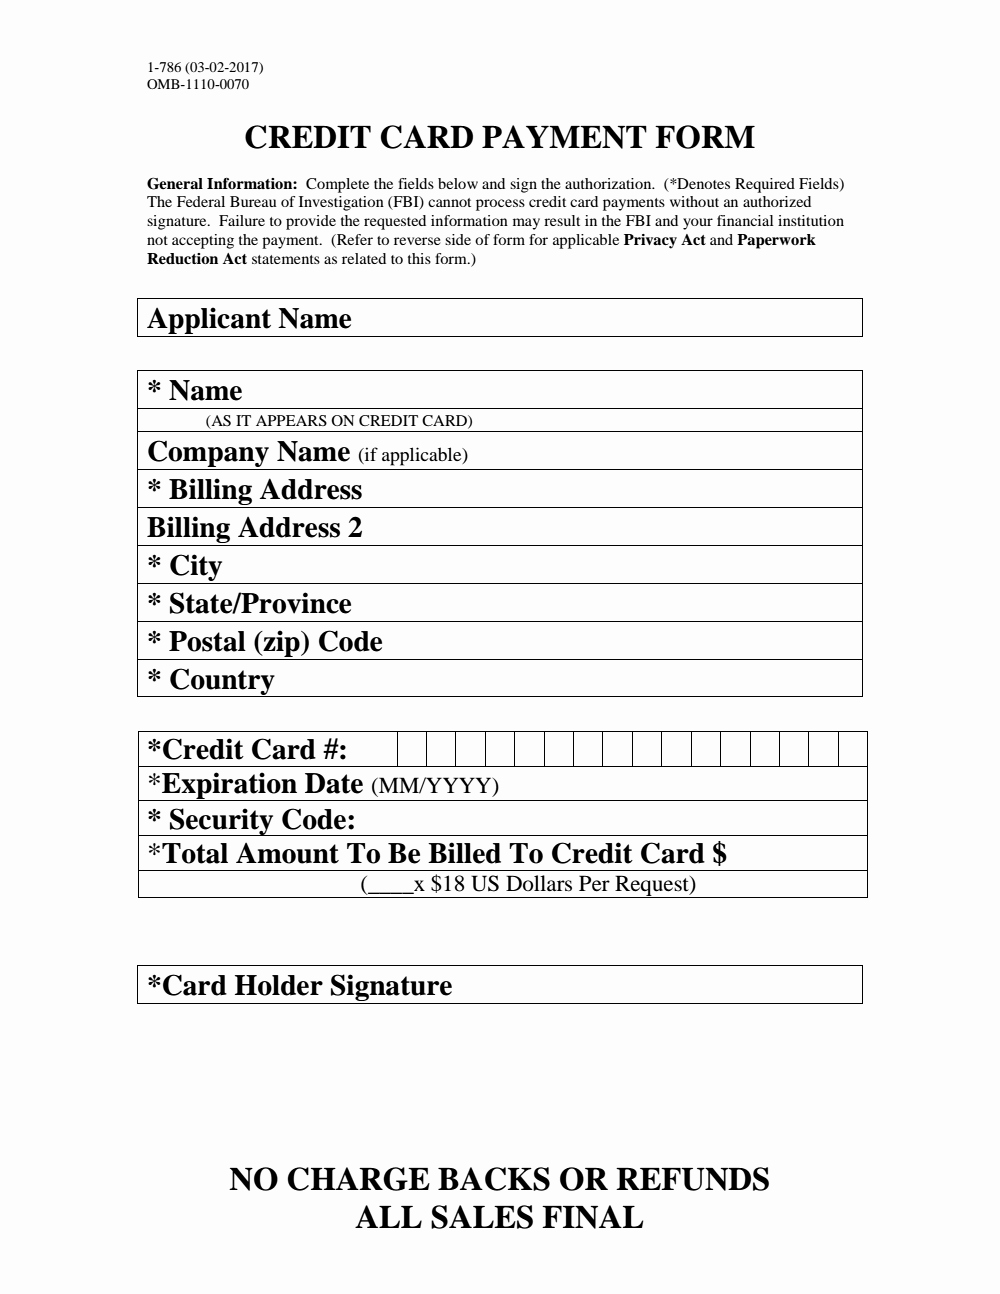 Free Online Payment form Inspirational Credit Card Payment form — Fbi